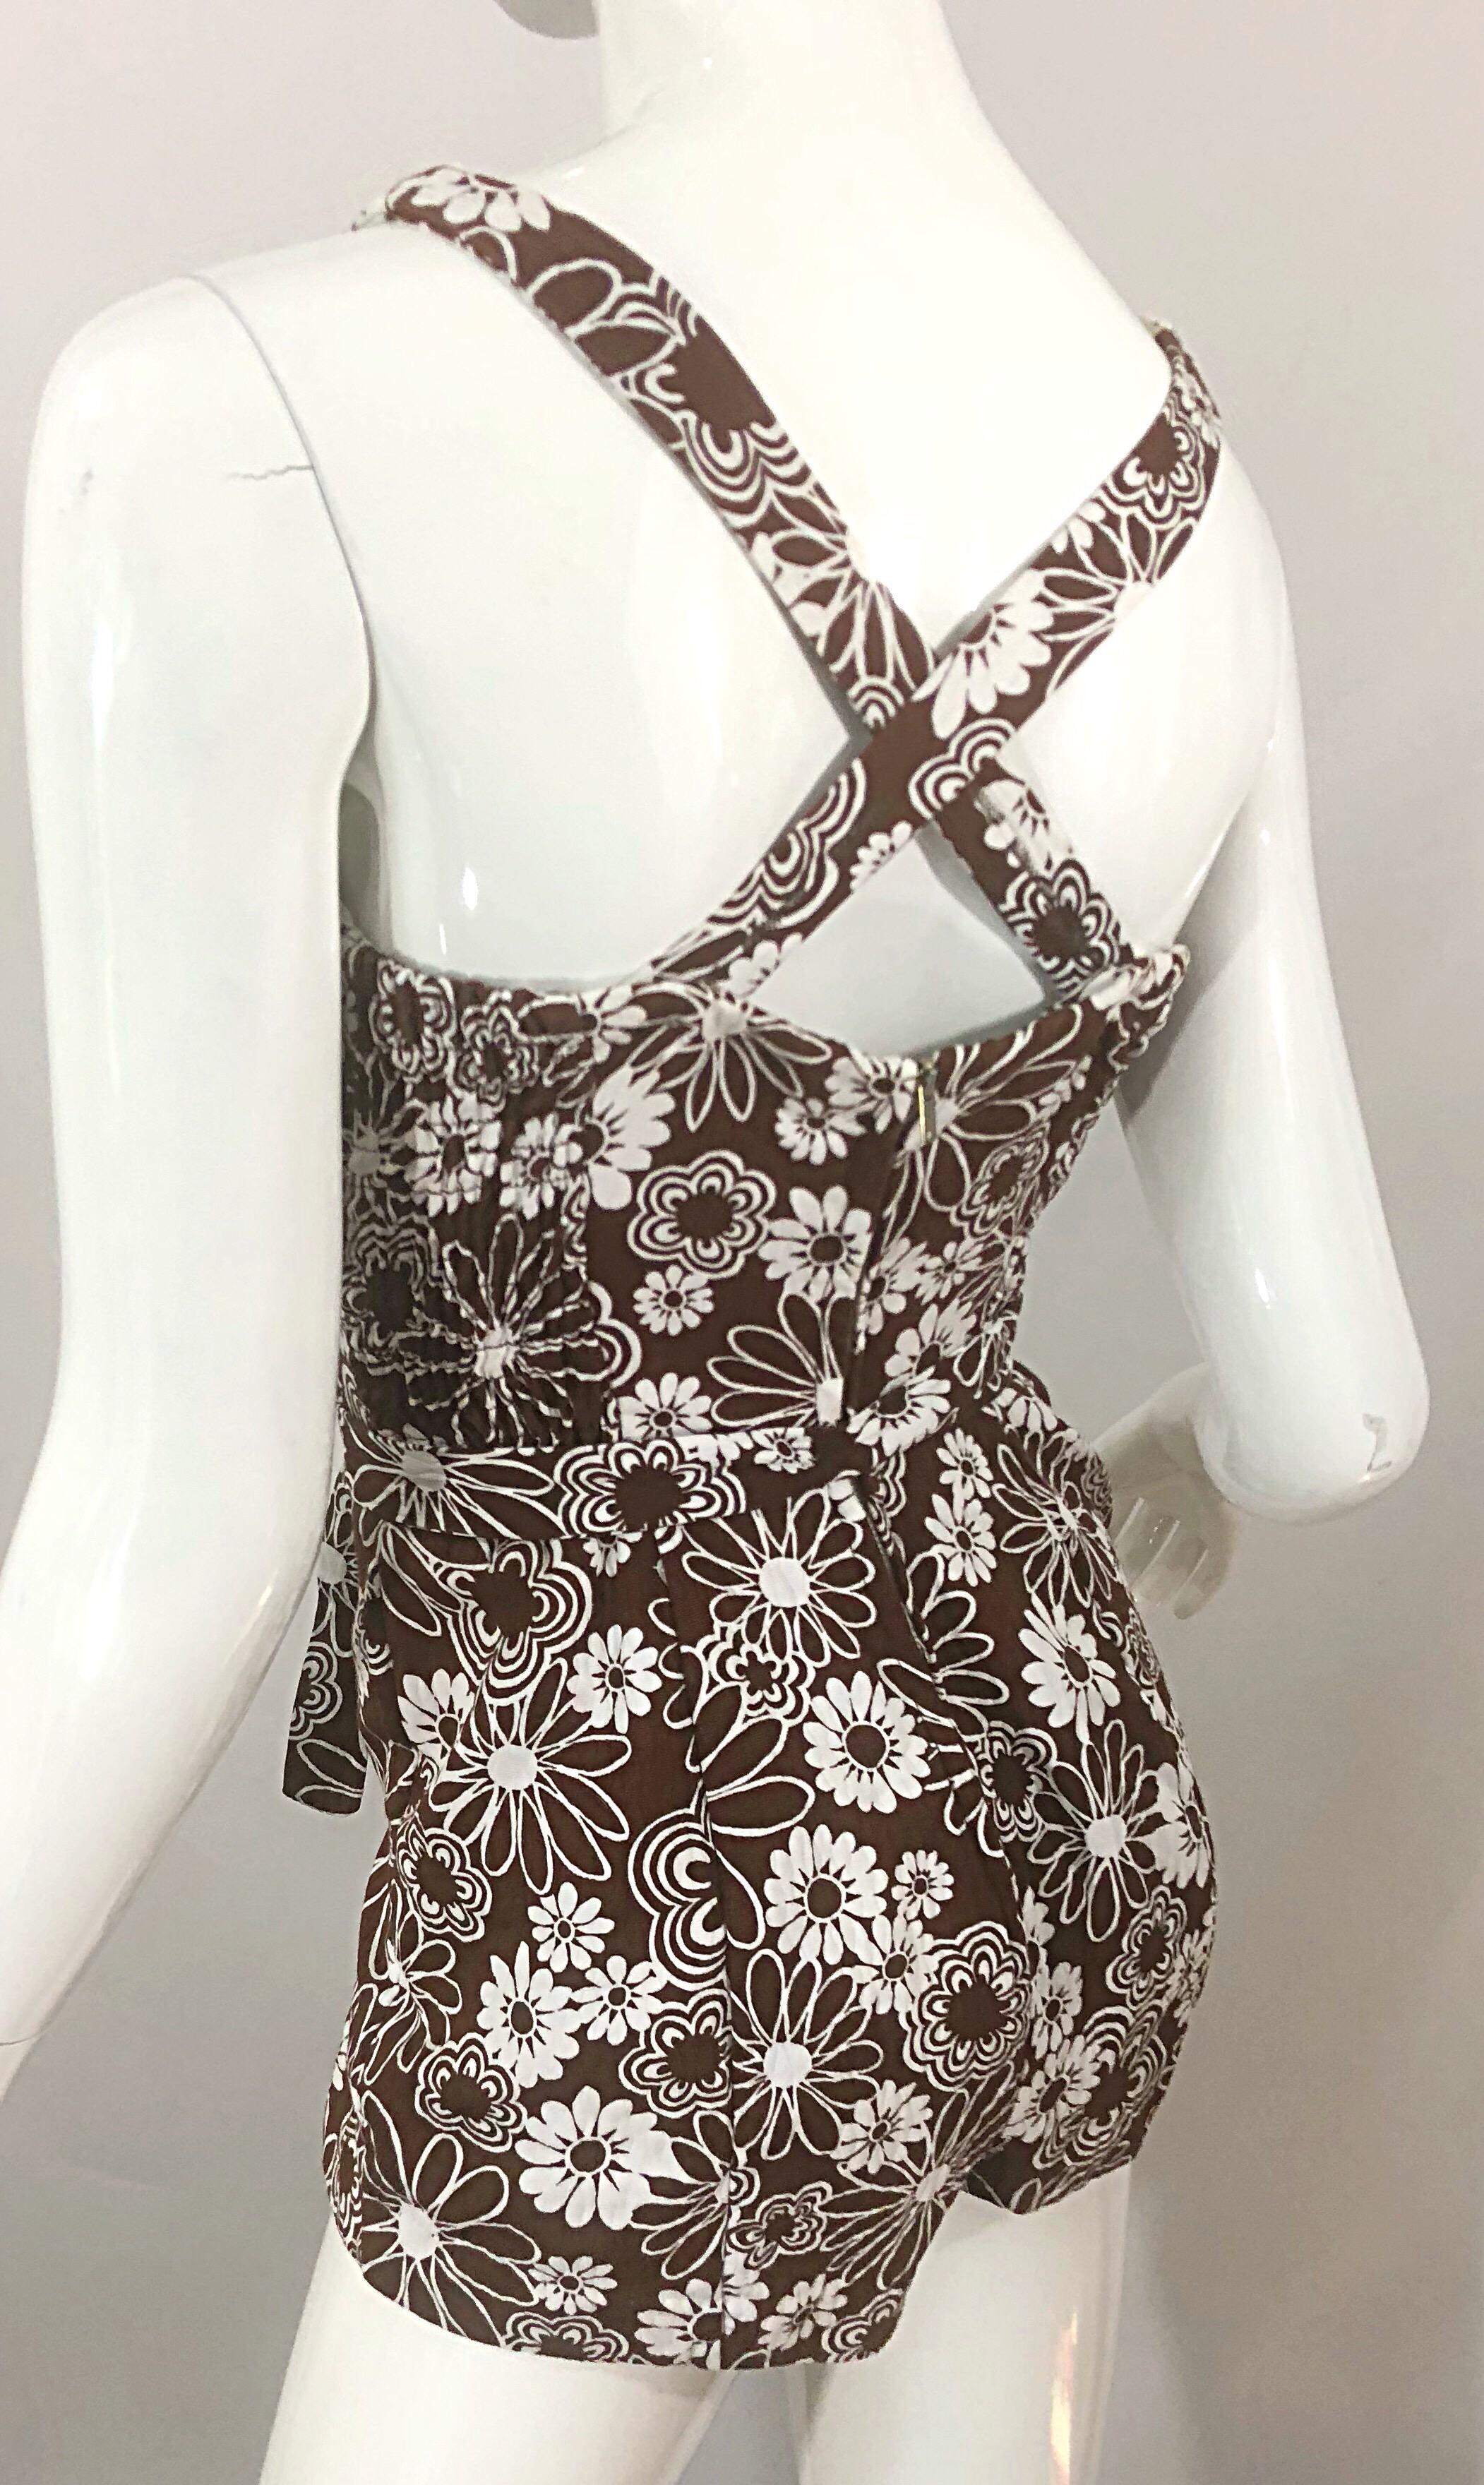 Chic 1960s Brown + White Belted One Piece Romper Swimsuit Vintage 60s Playsuit 2